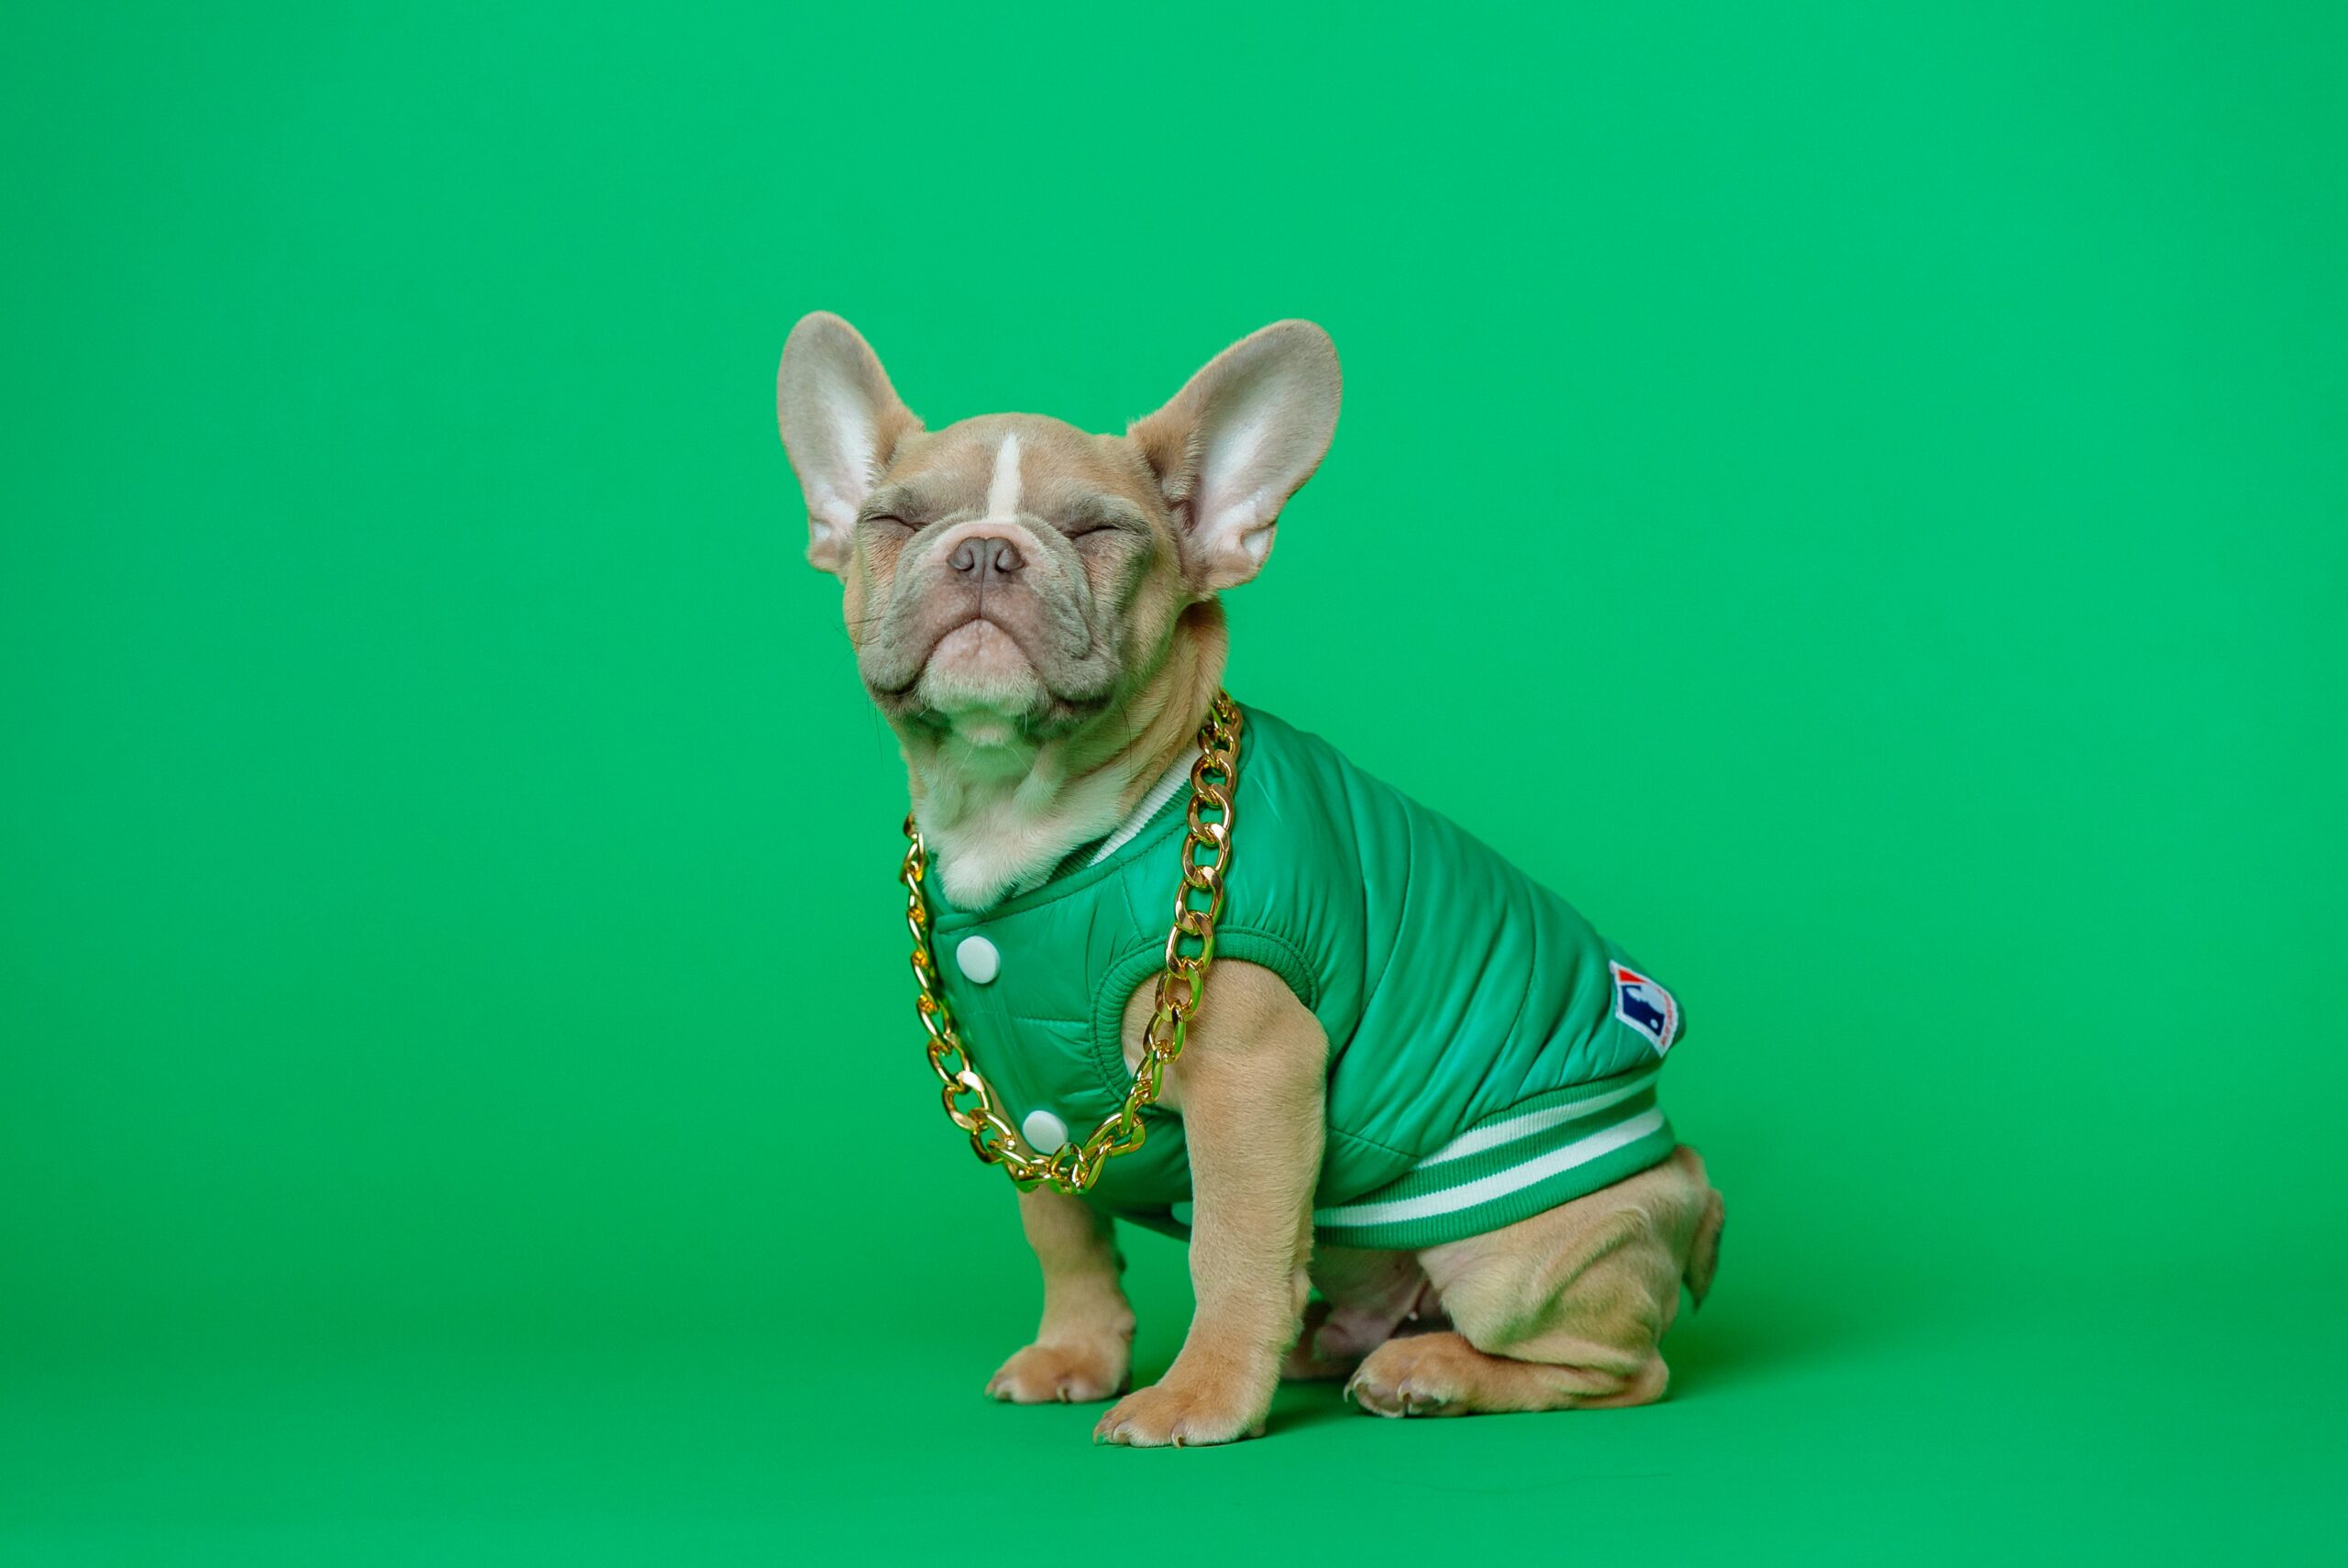 A french bull dog wearing a green jacket and gold chain in front of a green backdrop. It looks like the dog is smiling.